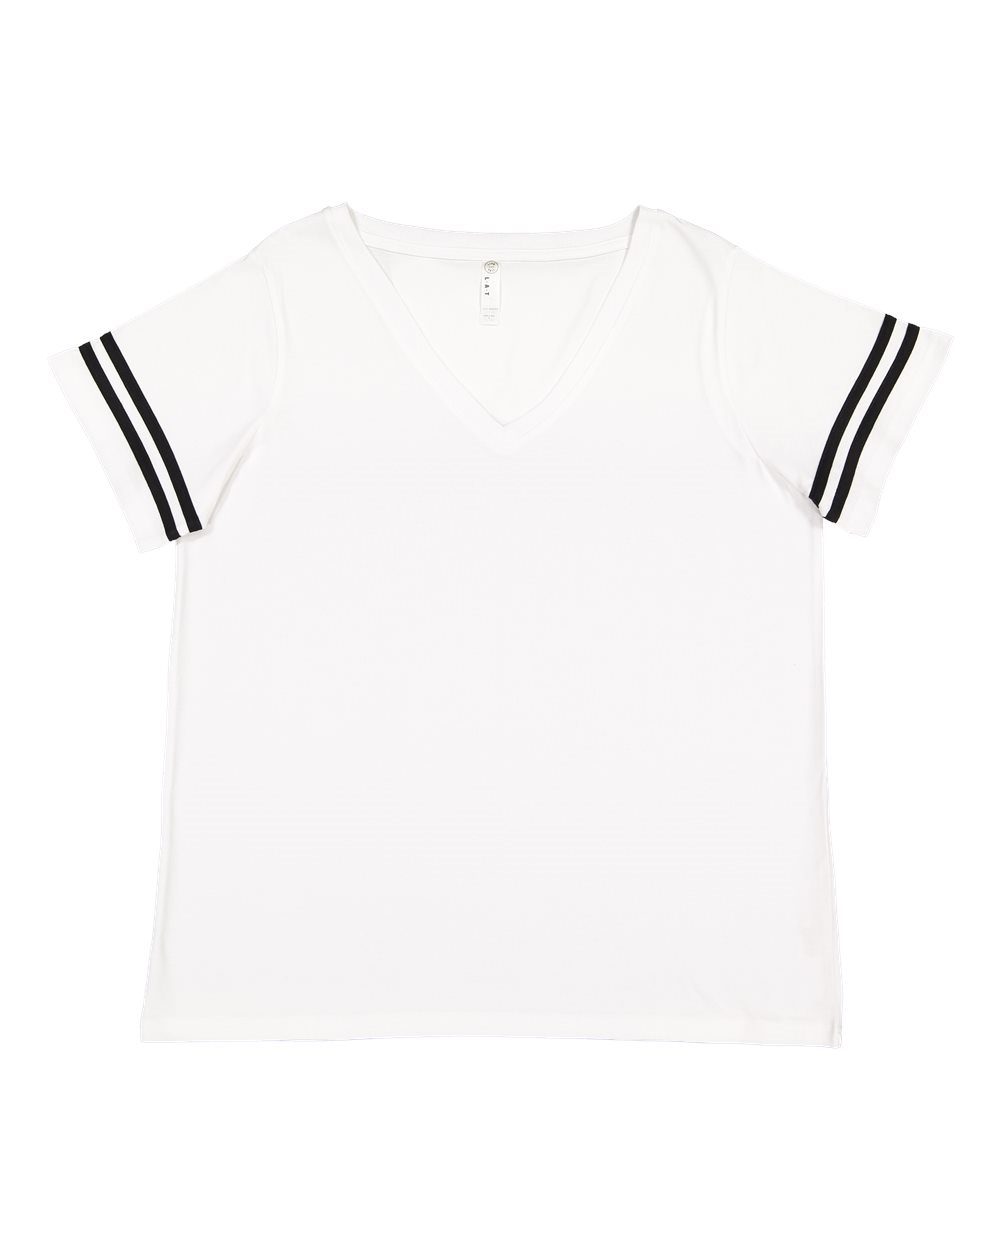 LAT 3837 - Curvy Collection Women's Vintage Football T-Shirt